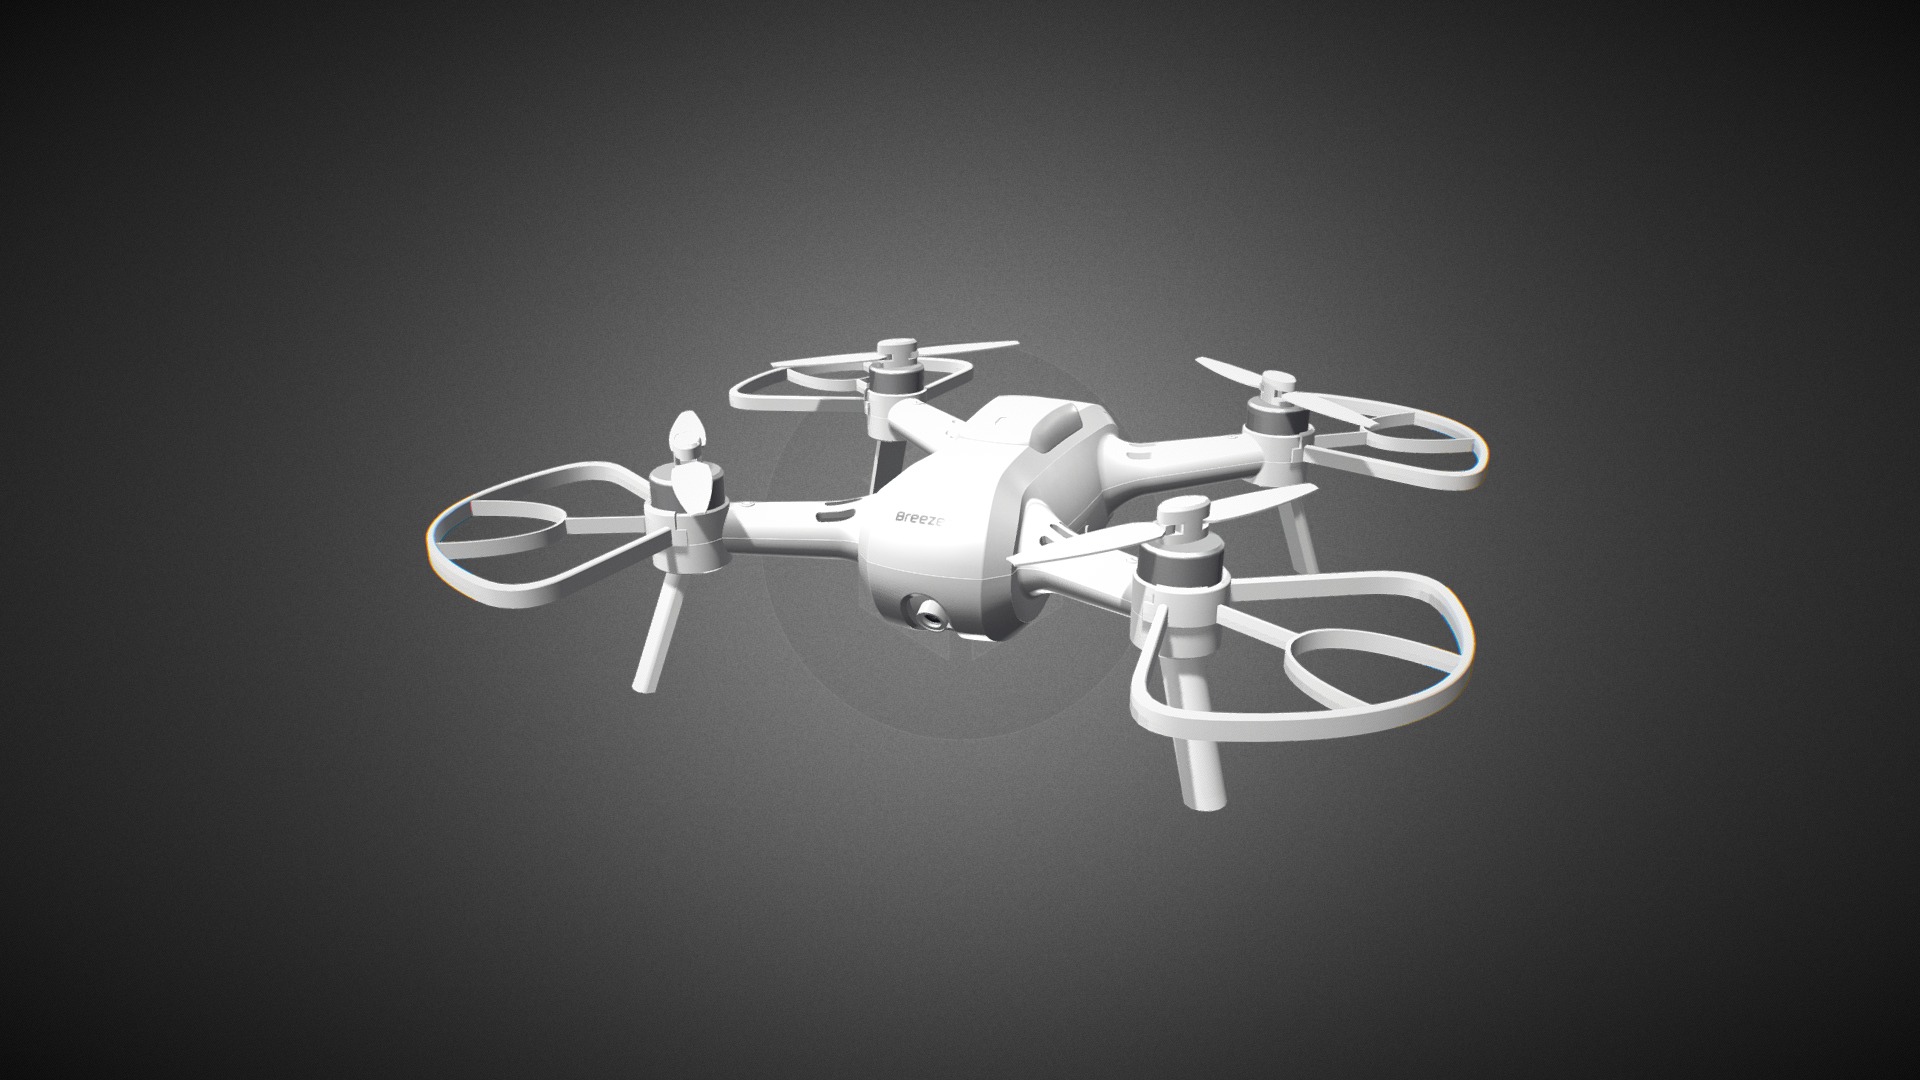 3D model Yuneec Breeze 4K for Element 3D - This is a 3D model of the Yuneec Breeze 4K for Element 3D. The 3D model is about a drone flying in the sky.